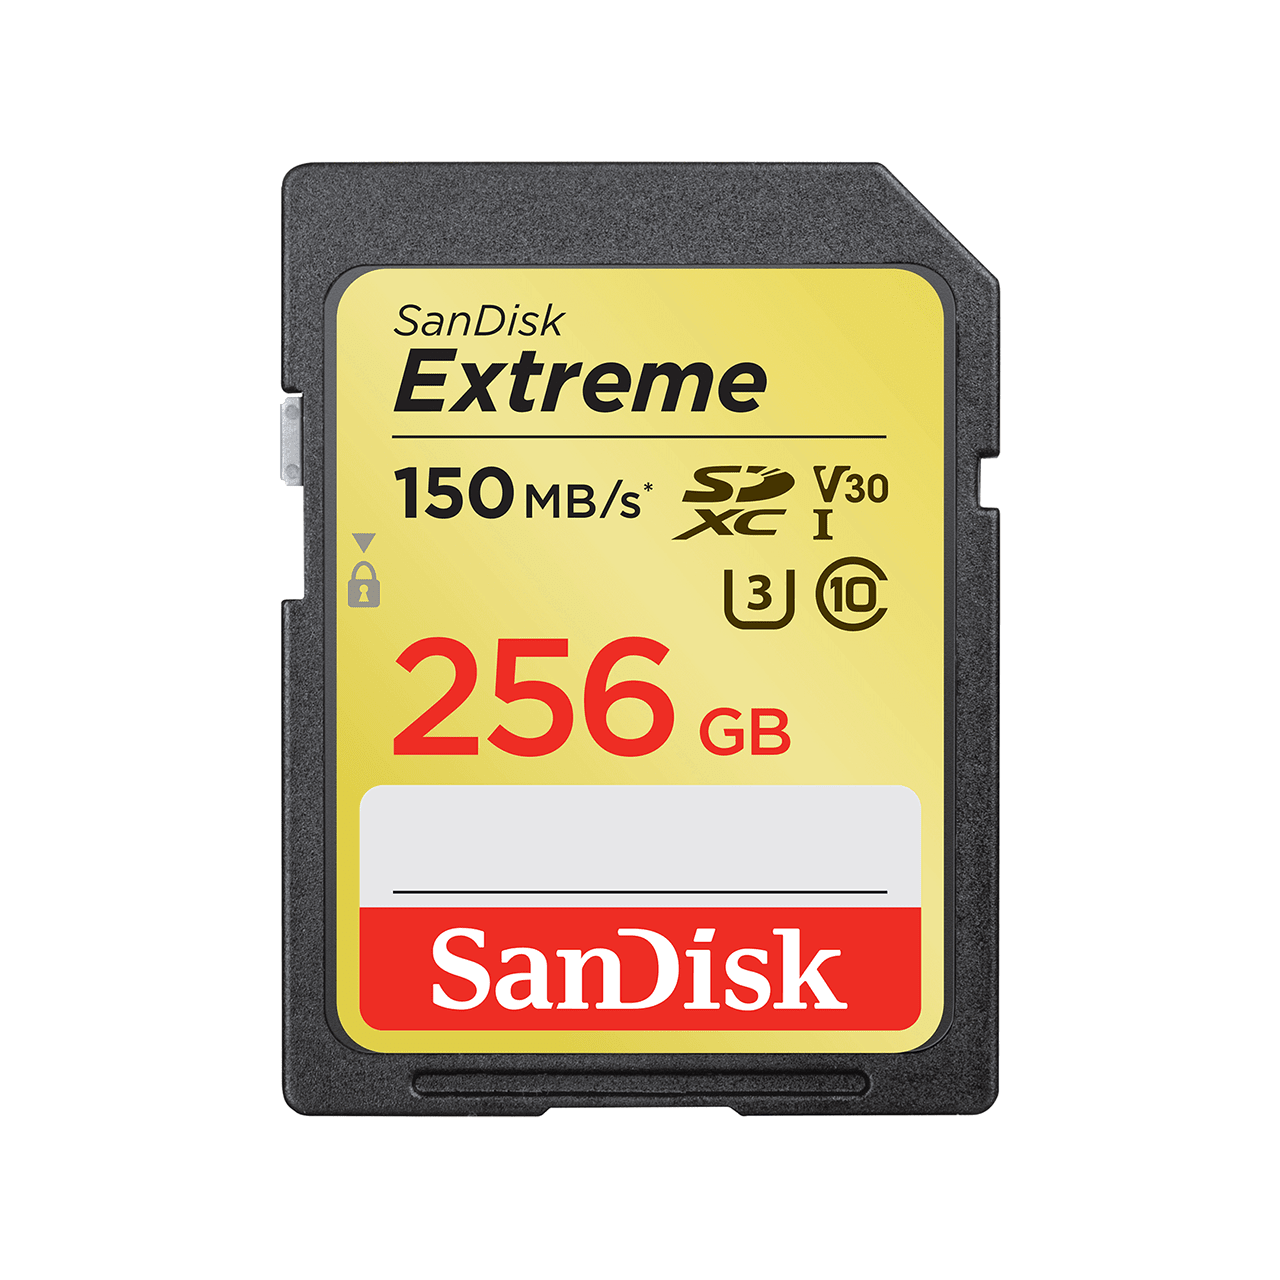 SanDisk Extreme SDHC/SDXC UHS-I Class 10 Memory Card (up to 90MB/s) 32GB/64GB/128GB